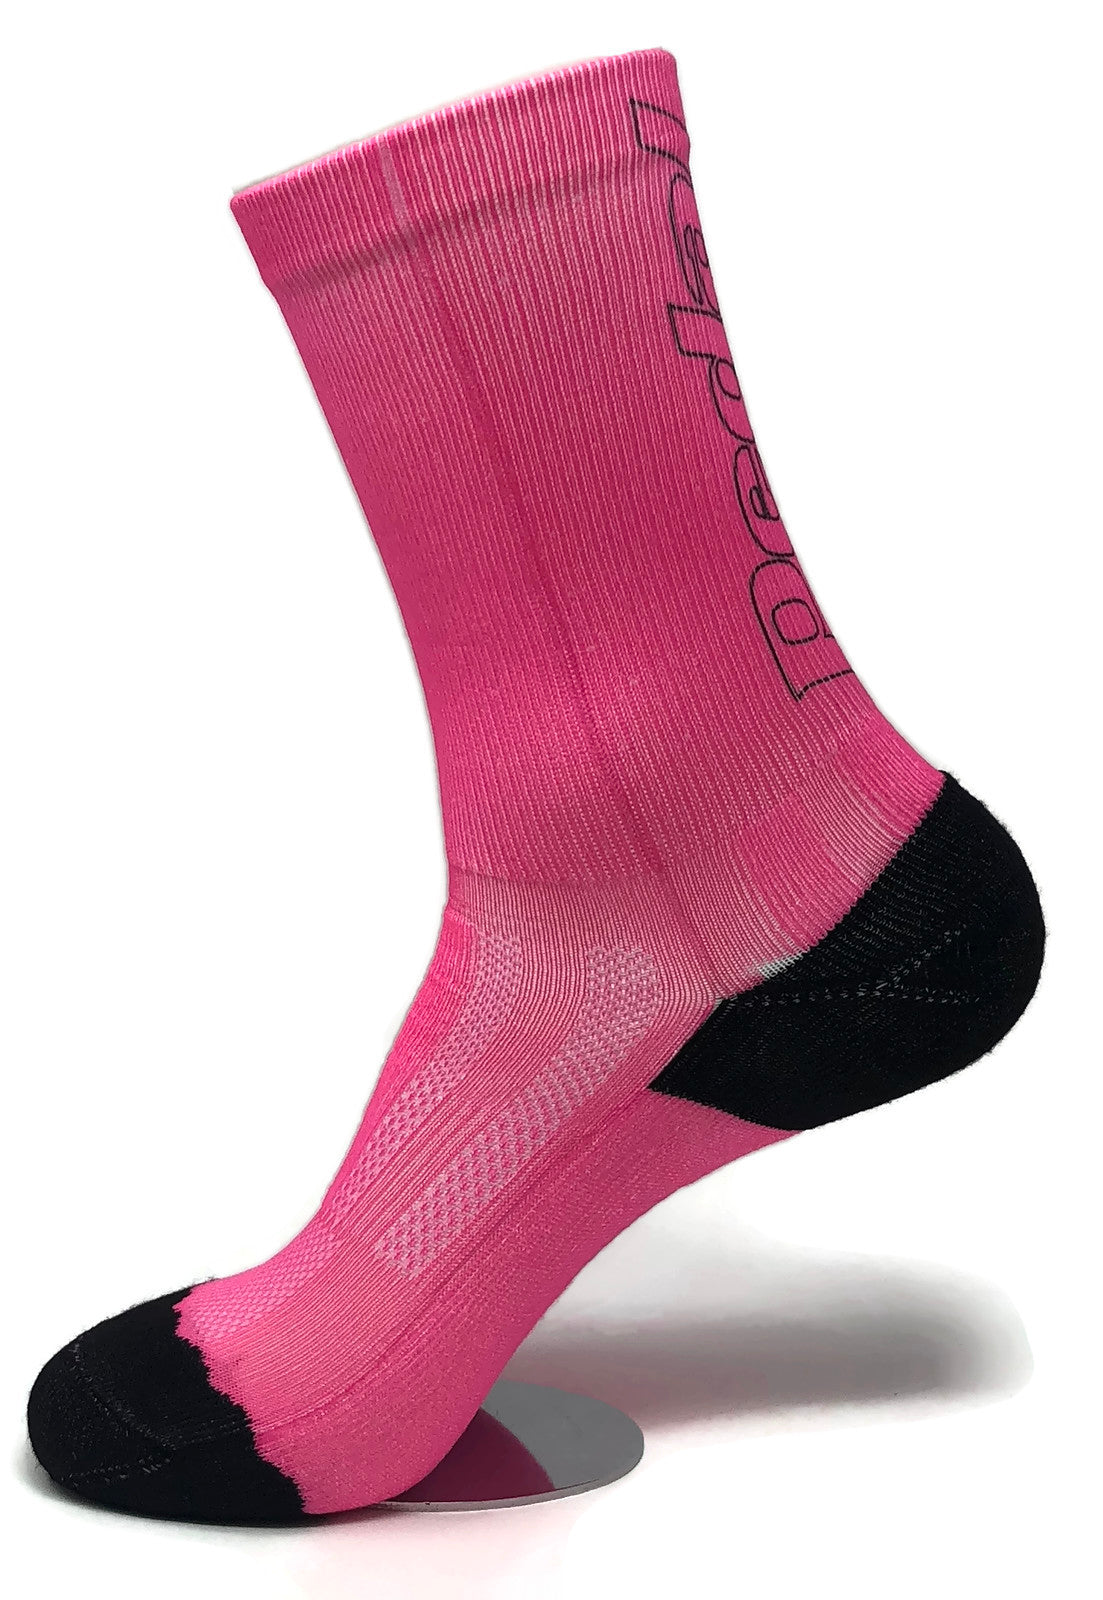 Hi-Viz Sublimated Sock - comes in 4 colors - ISD